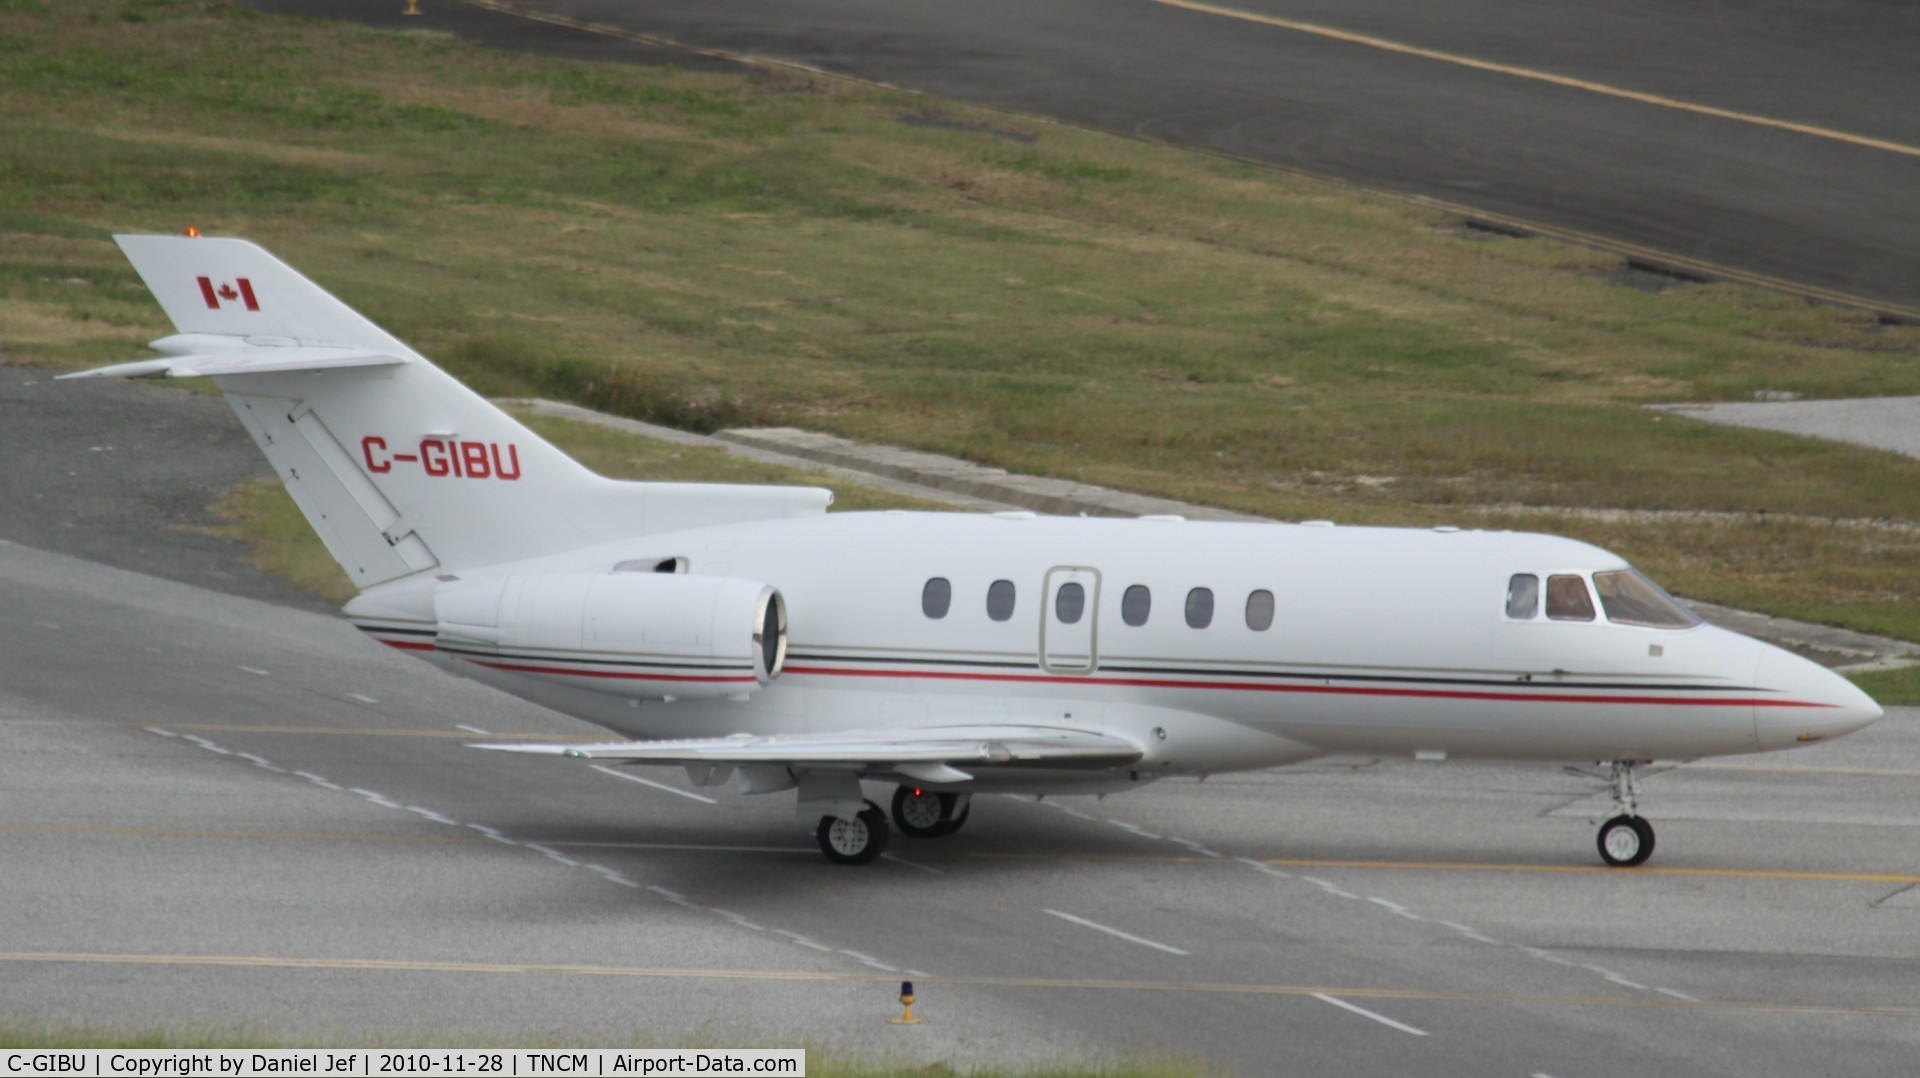 C-GIBU, 2001 Raytheon Hawker 800XP C/N 258507, Taxing to the holding point A